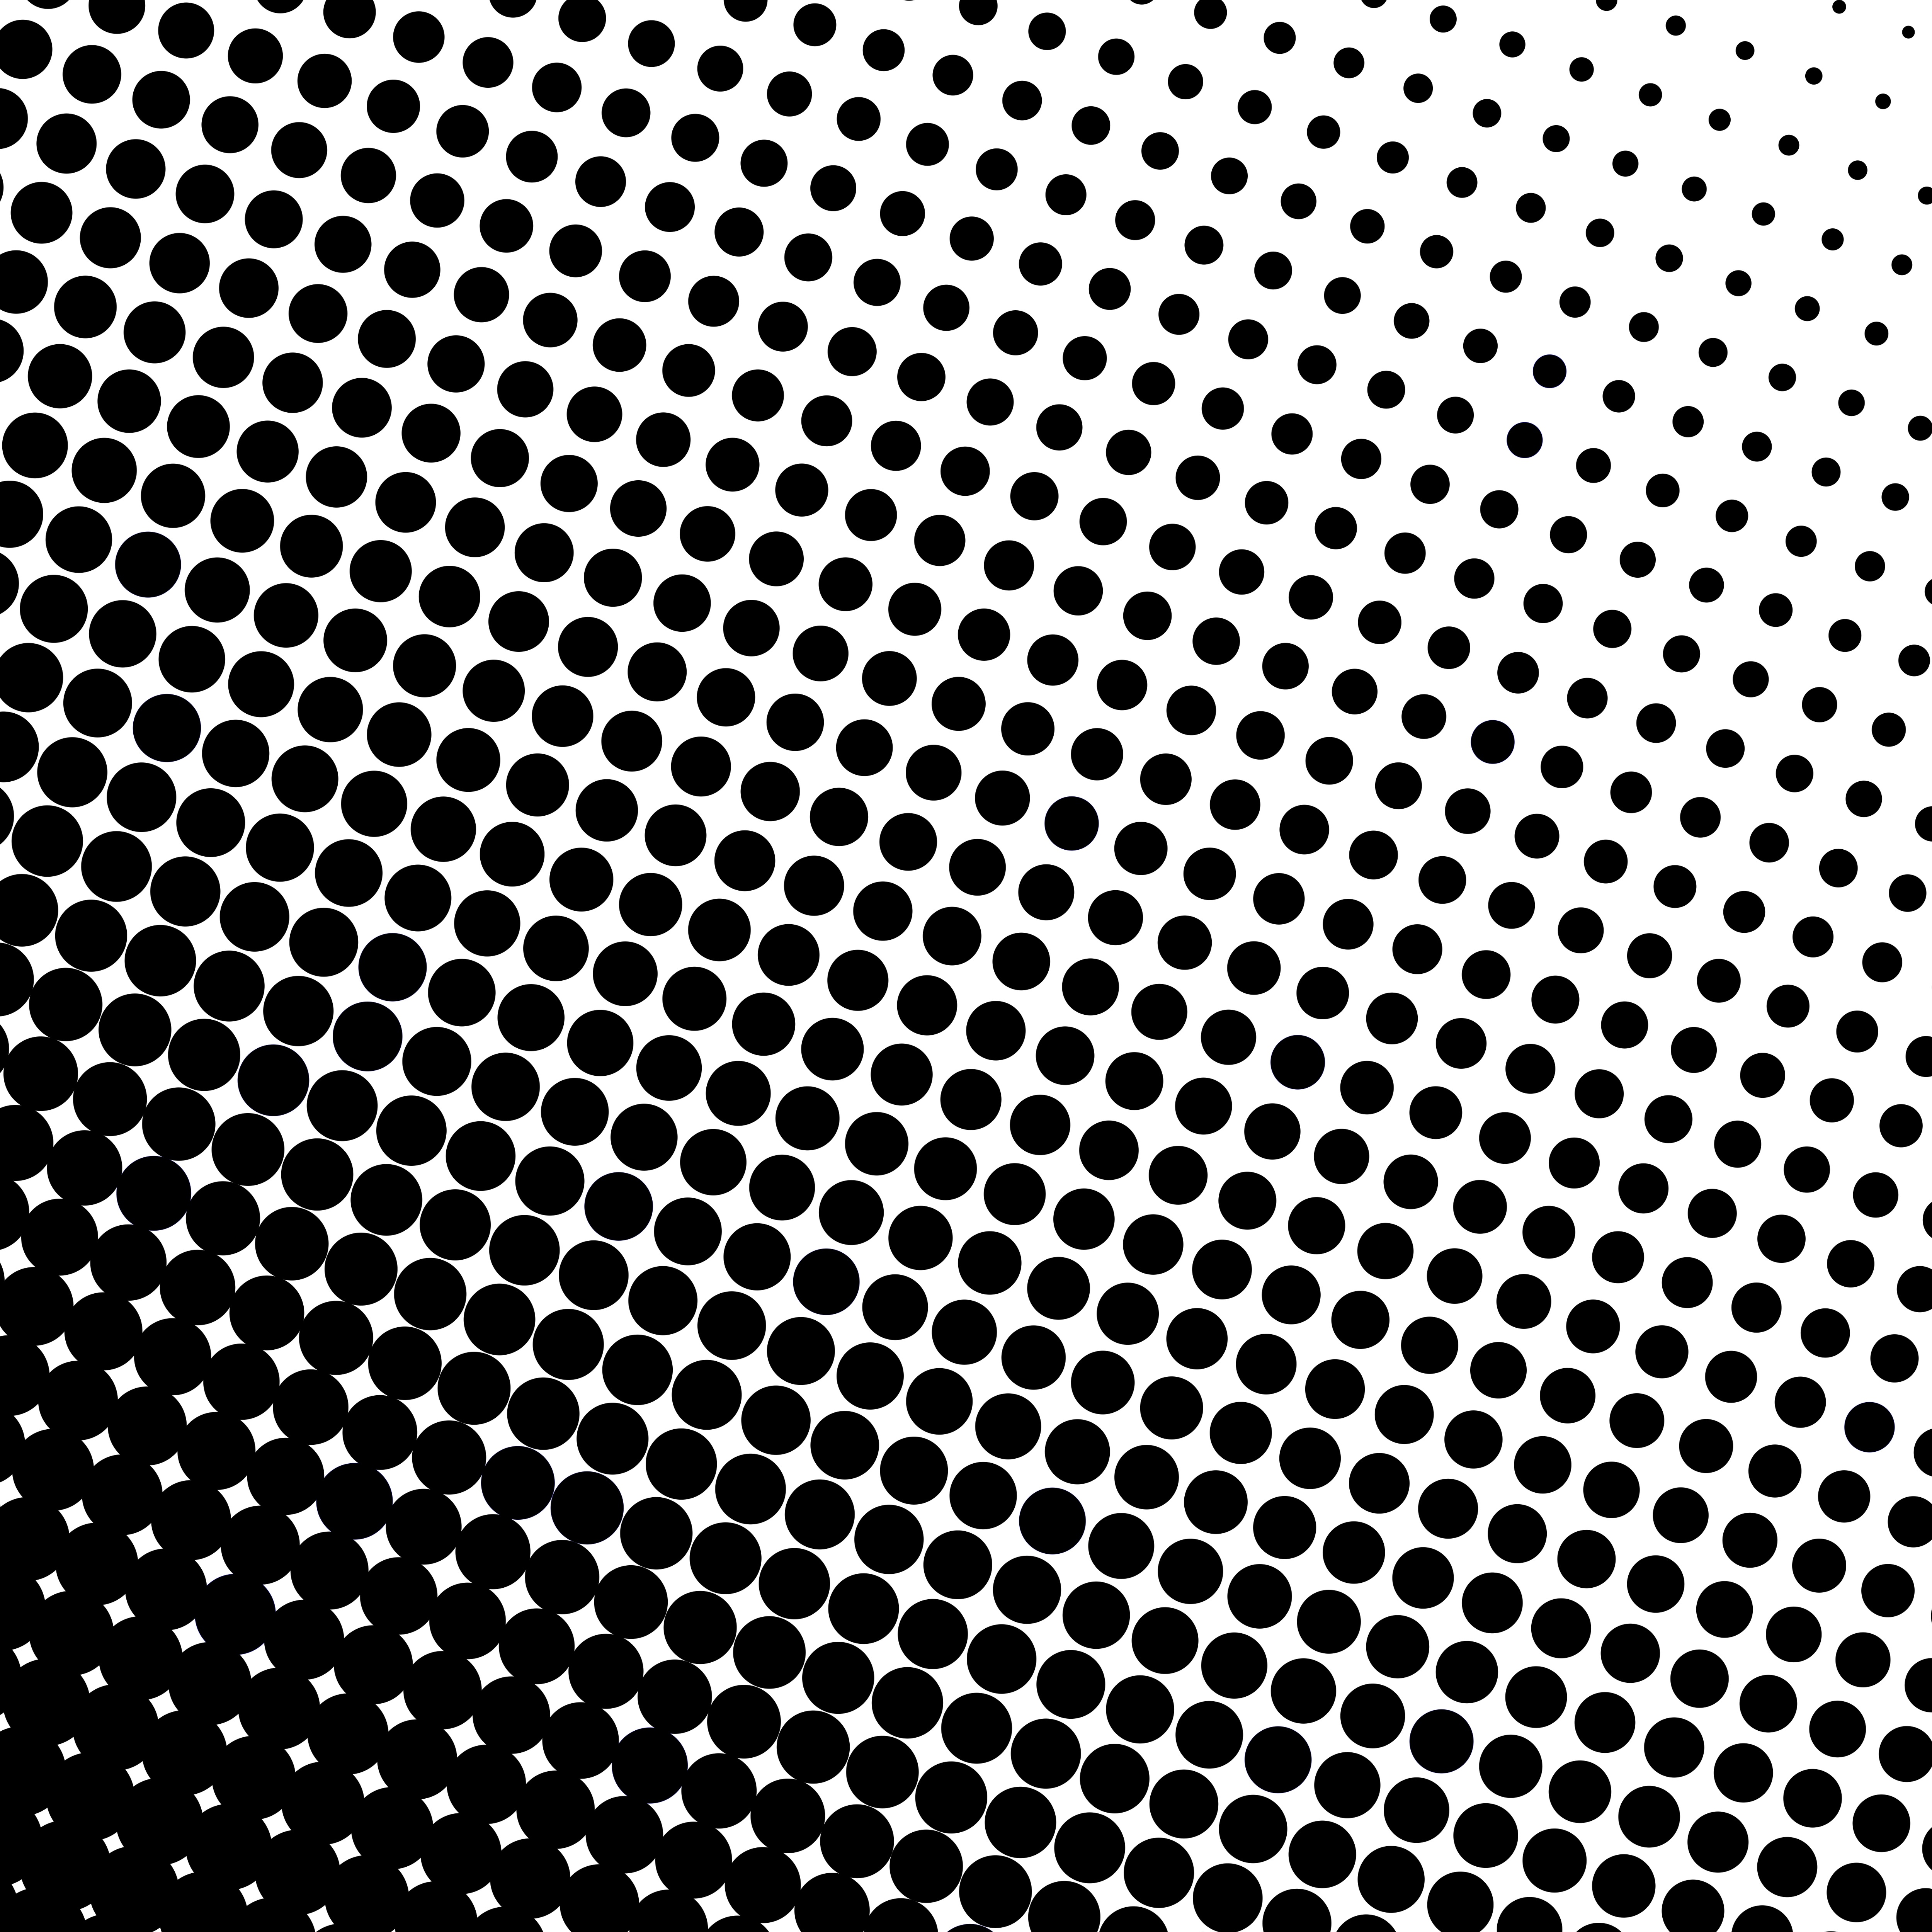 circles, texture, textures, bw, chb, lots of, multitude, magnification, increase UHD